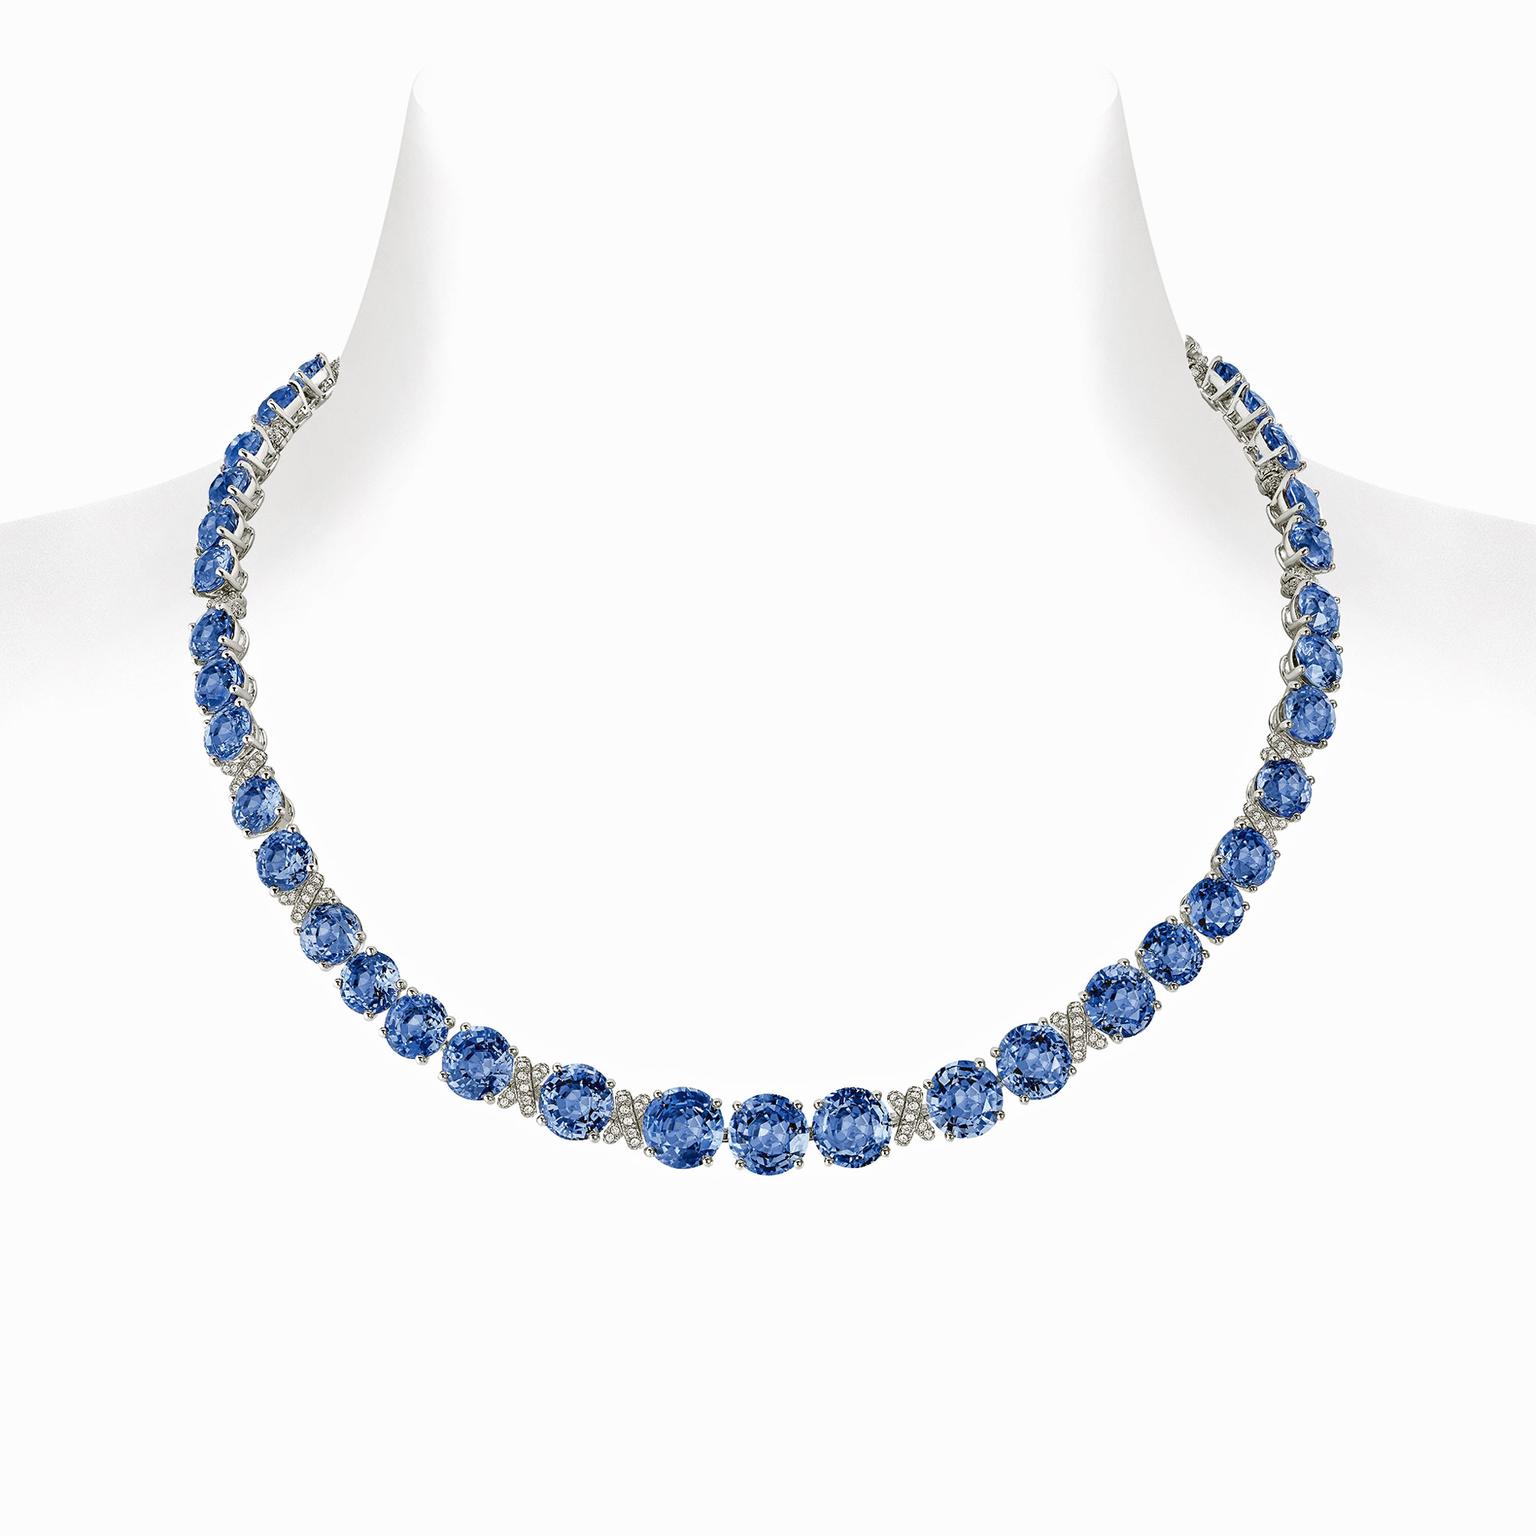 Chaumet Liens high jewellery necklace set with 34 Ceylon sapphires